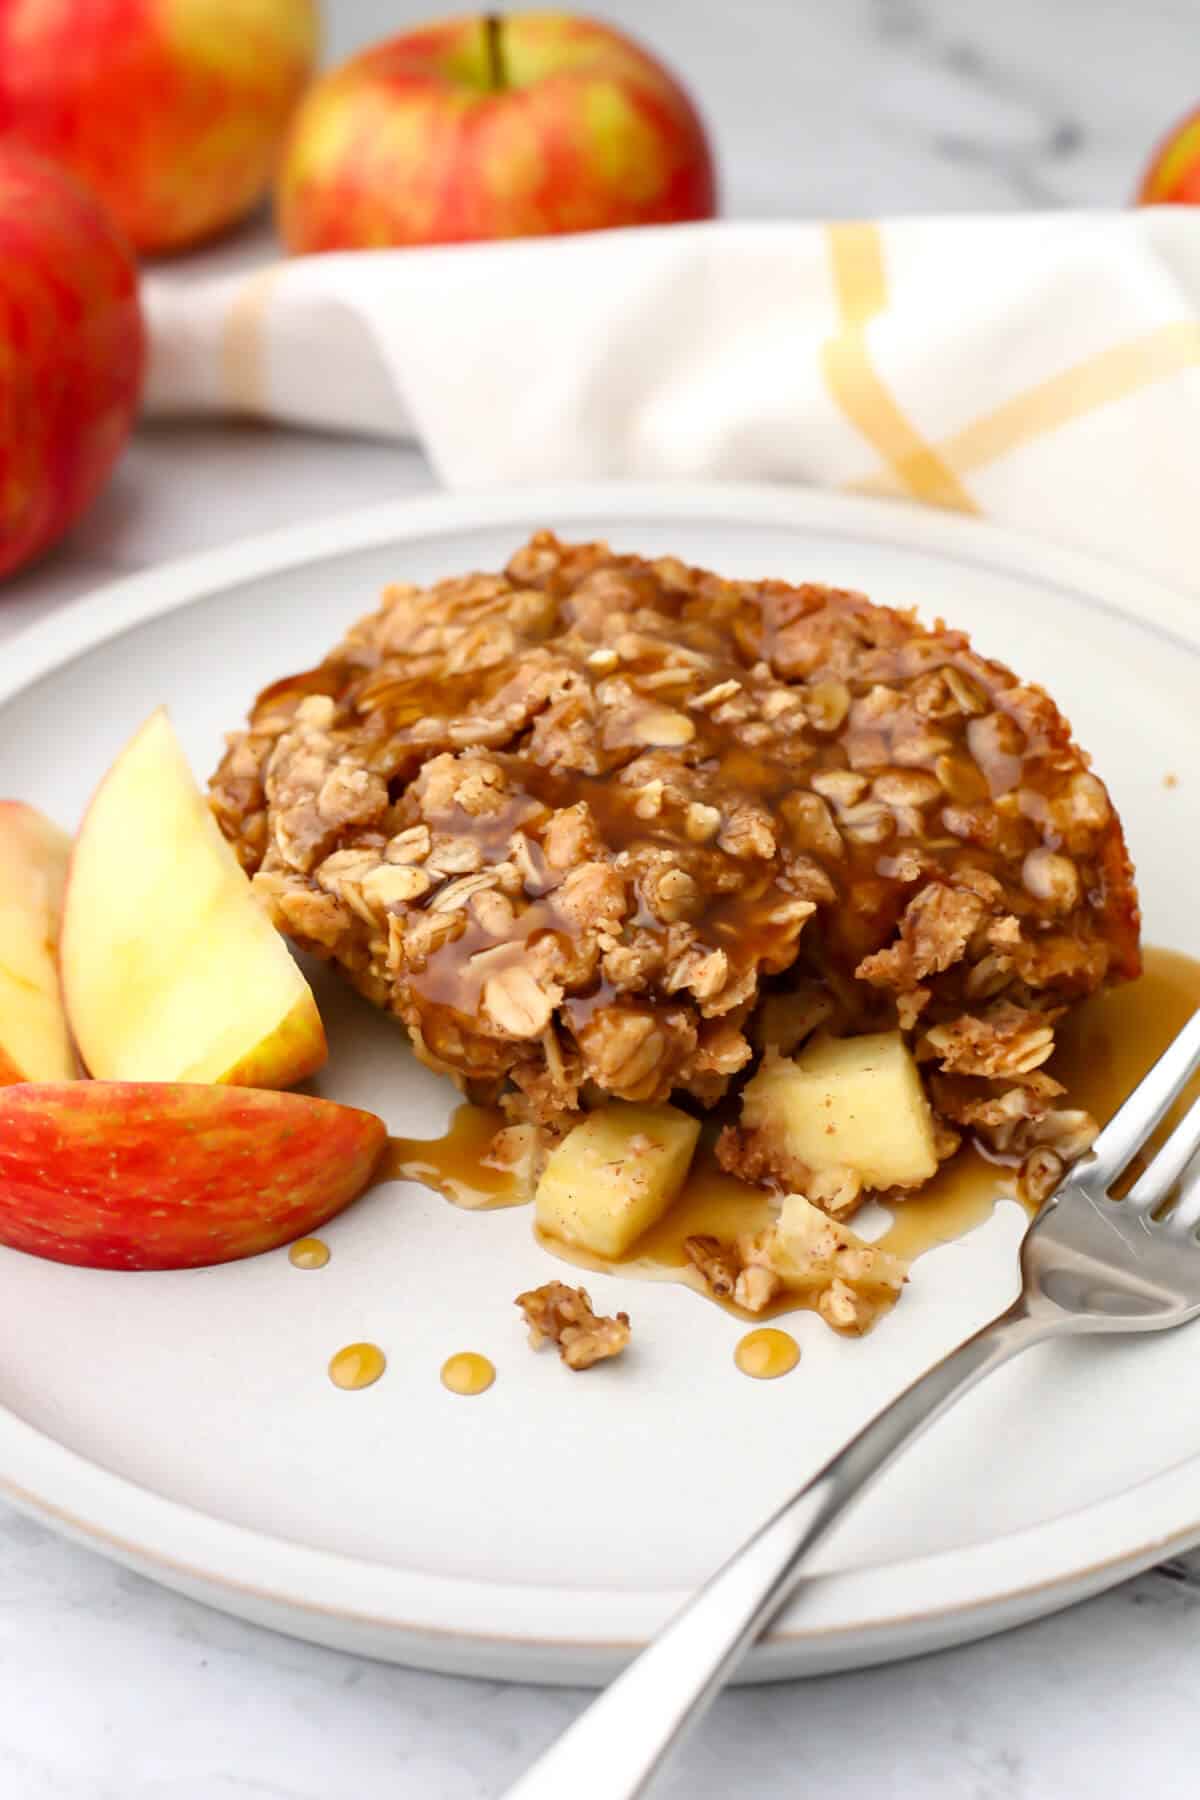 Vegan baked oats on a plate with slice apples on the side and caramel poured over it.